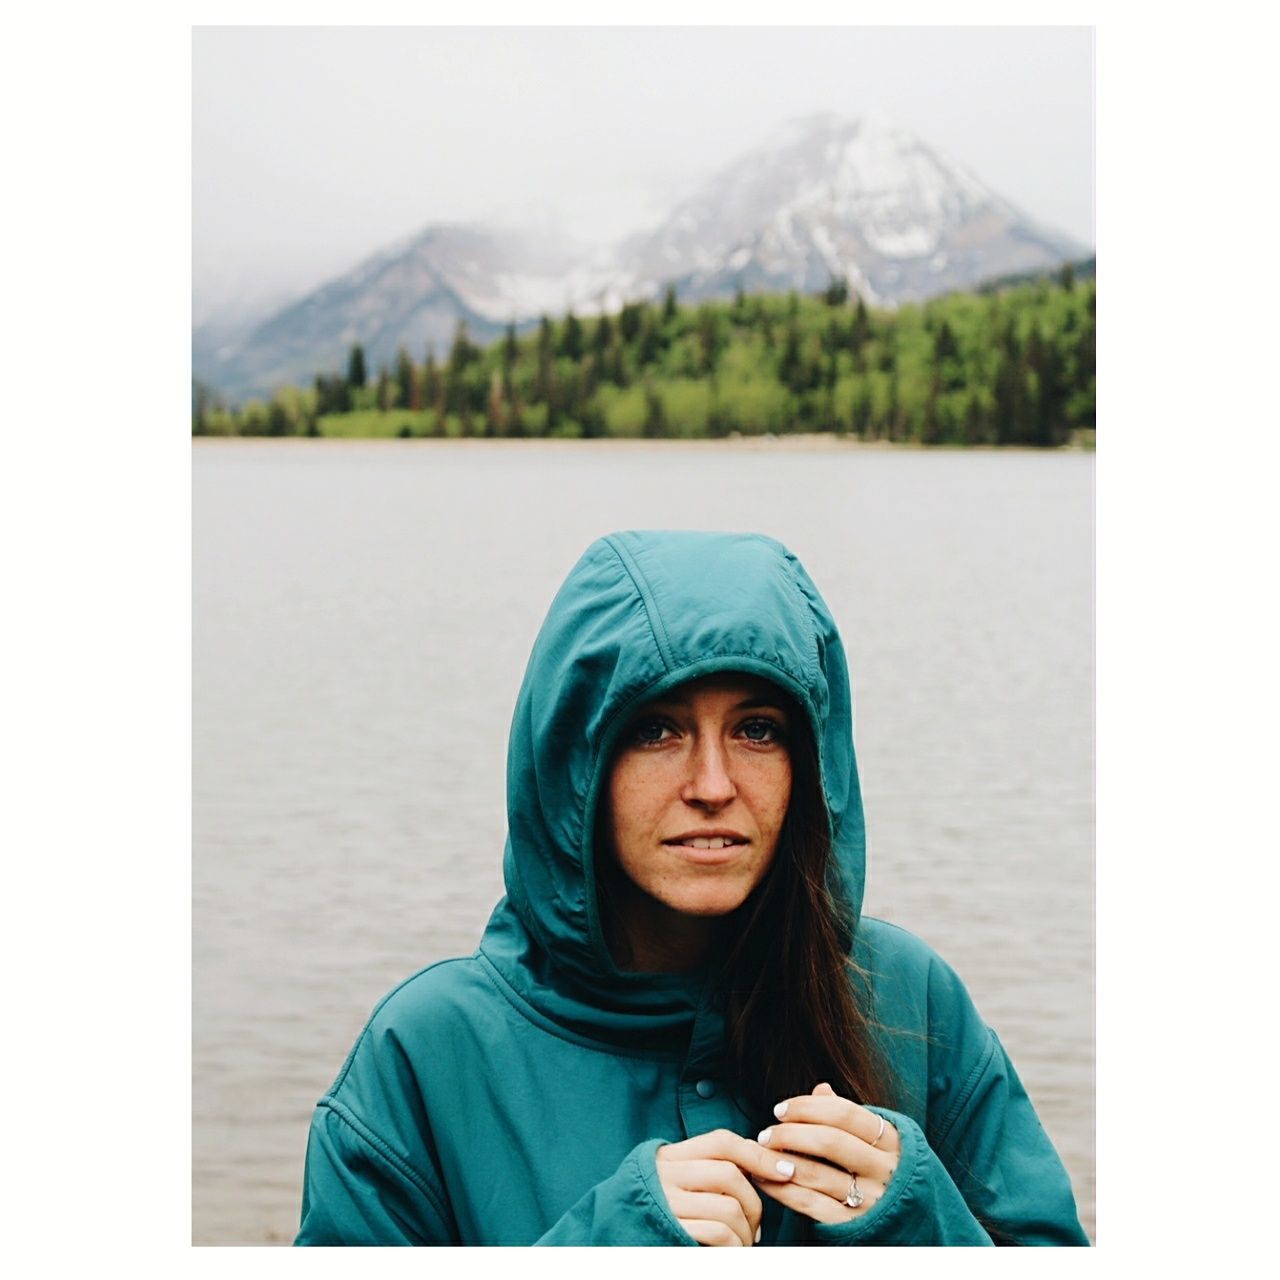 portrait, mountain, one person, water, hood, real people, transfer print, headshot, hood - clothing, lifestyles, lake, auto post production filter, leisure activity, hooded shirt, mountain range, day, front view, clothing, outdoors